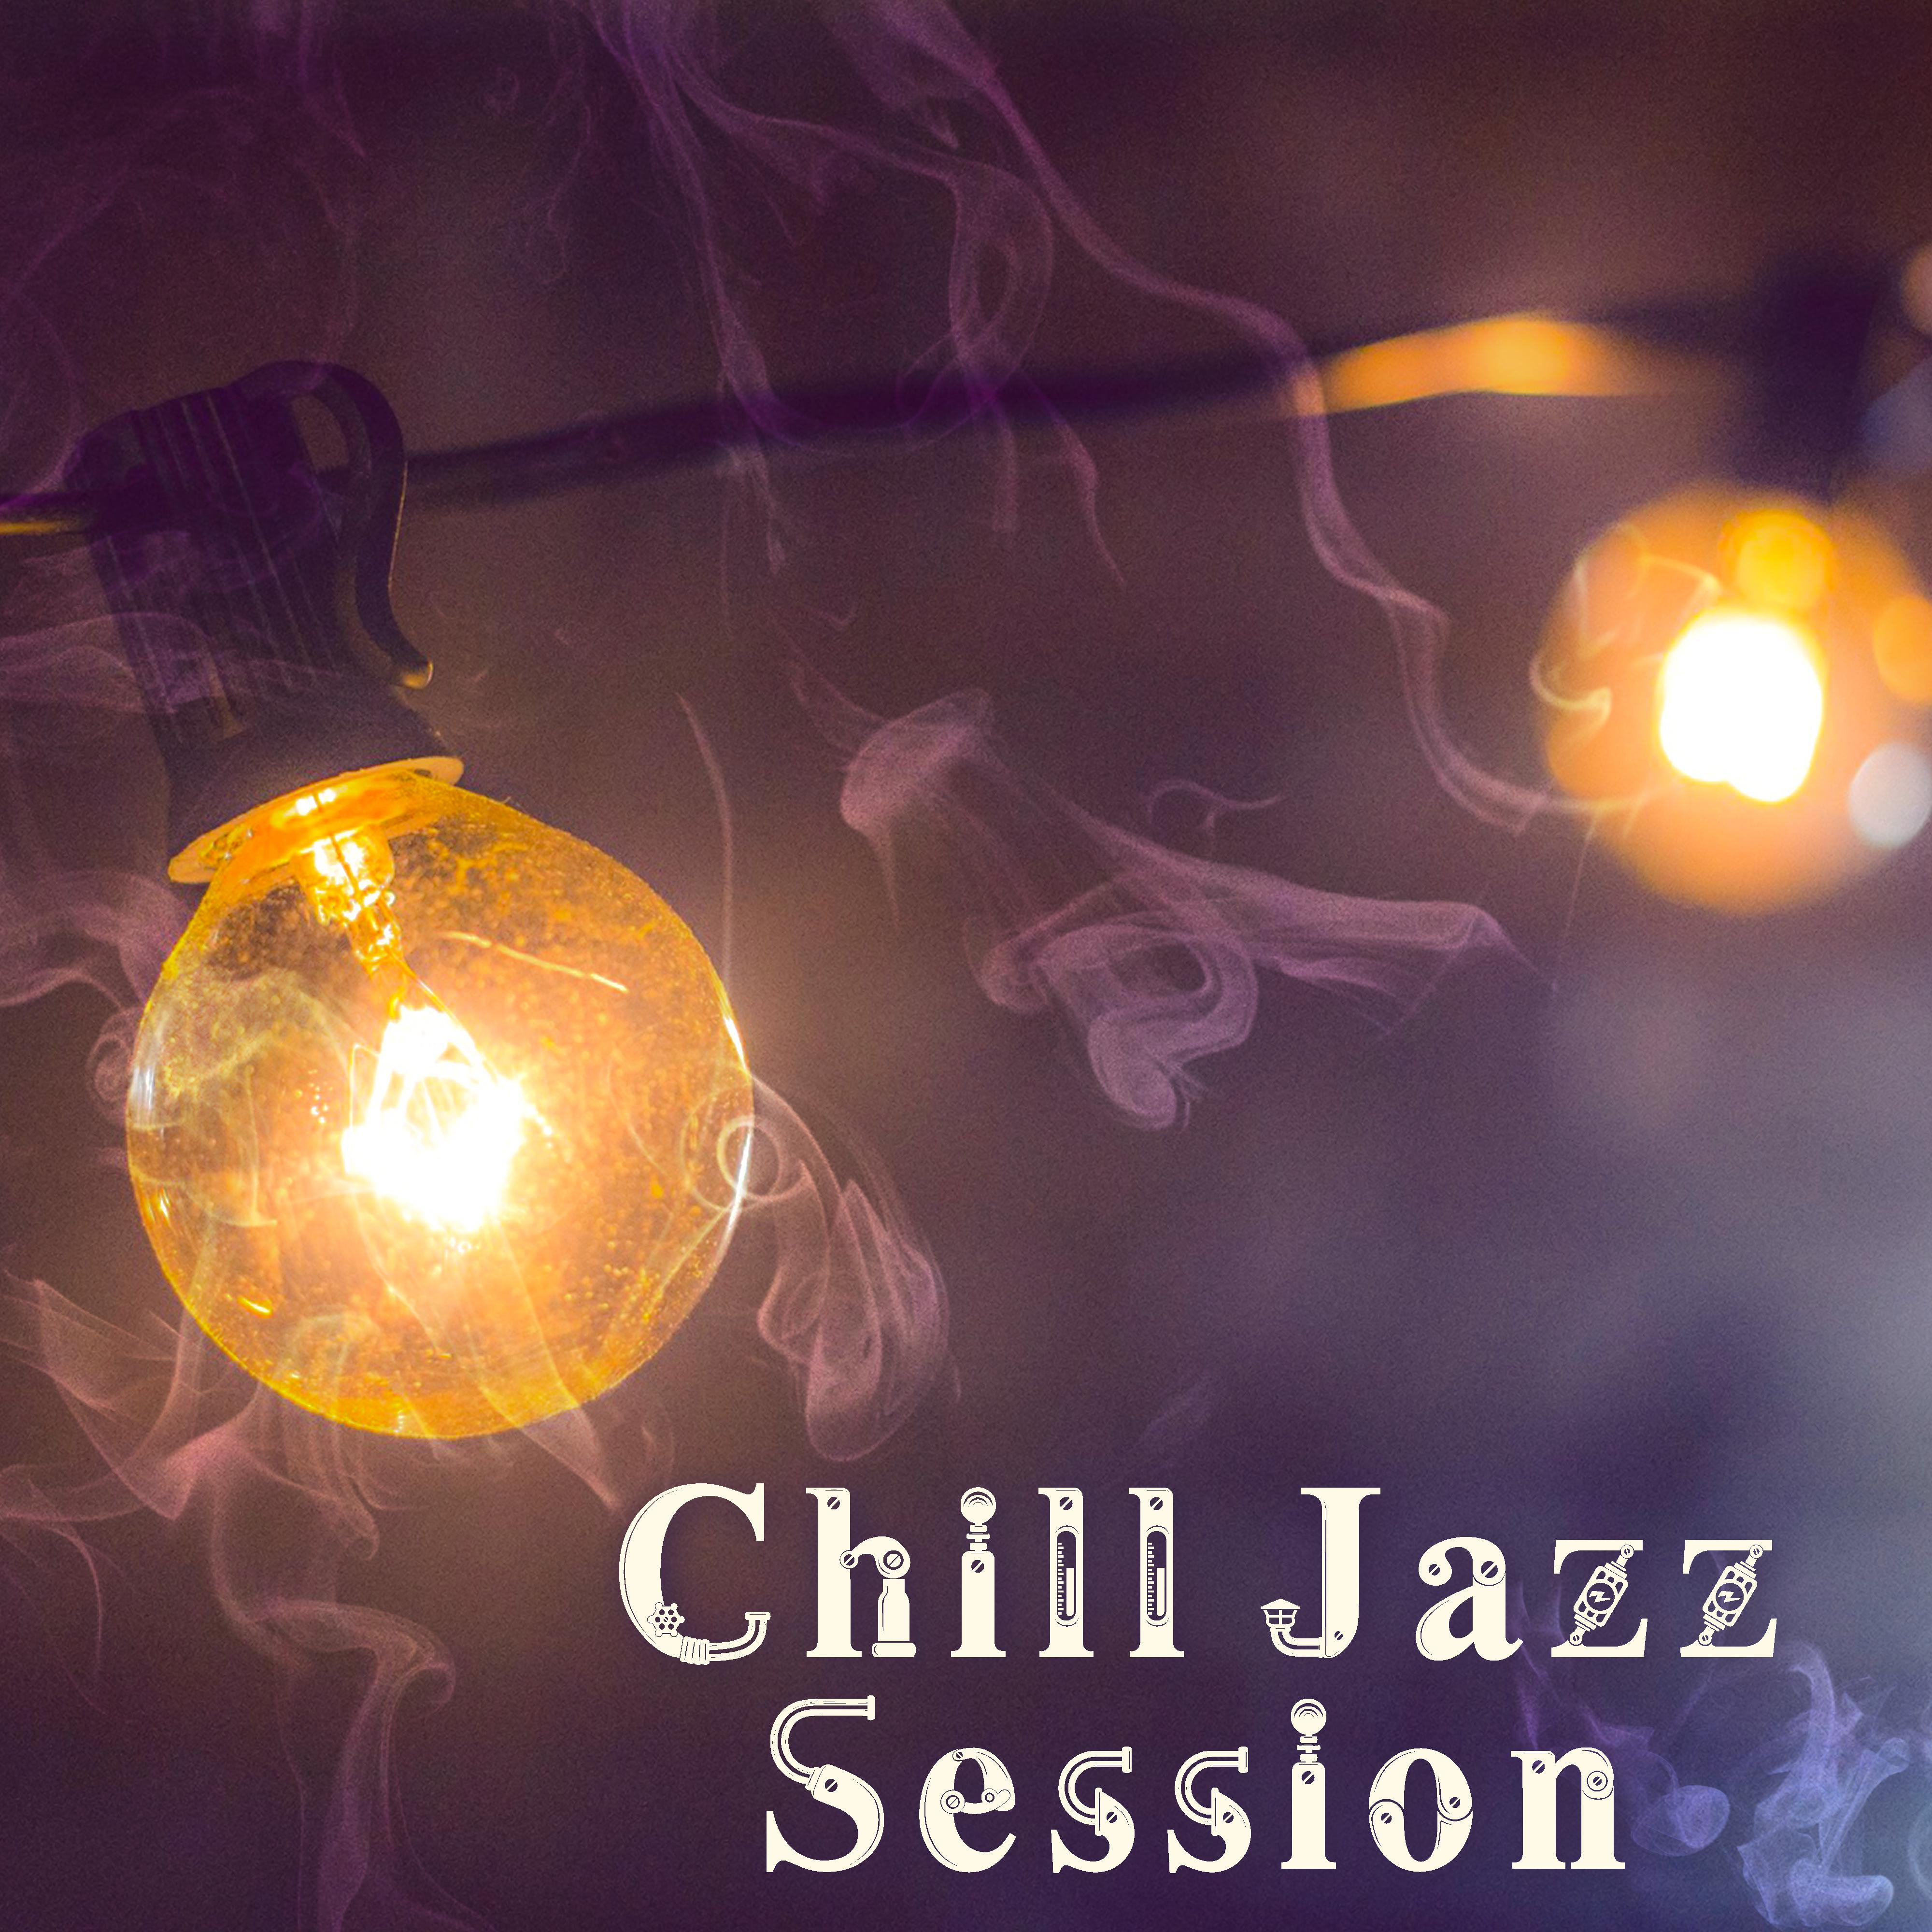 Chill Jazz Session  Evening Jazz Club, Smooth Blue Sounds, Easy Listening, Best Background Music